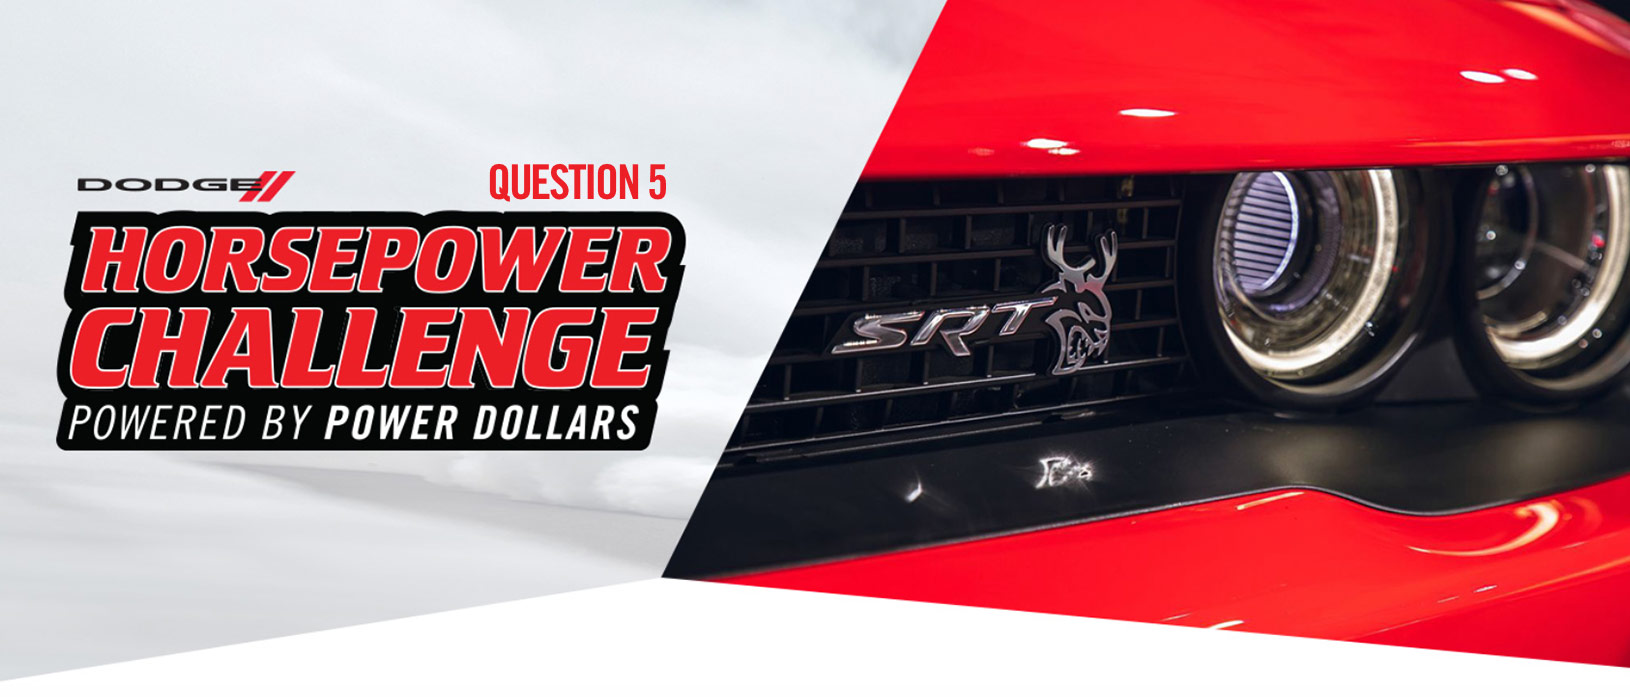 Fifth and Final ‘Dodge Horsepower Challenge’ Released on Dodge.com